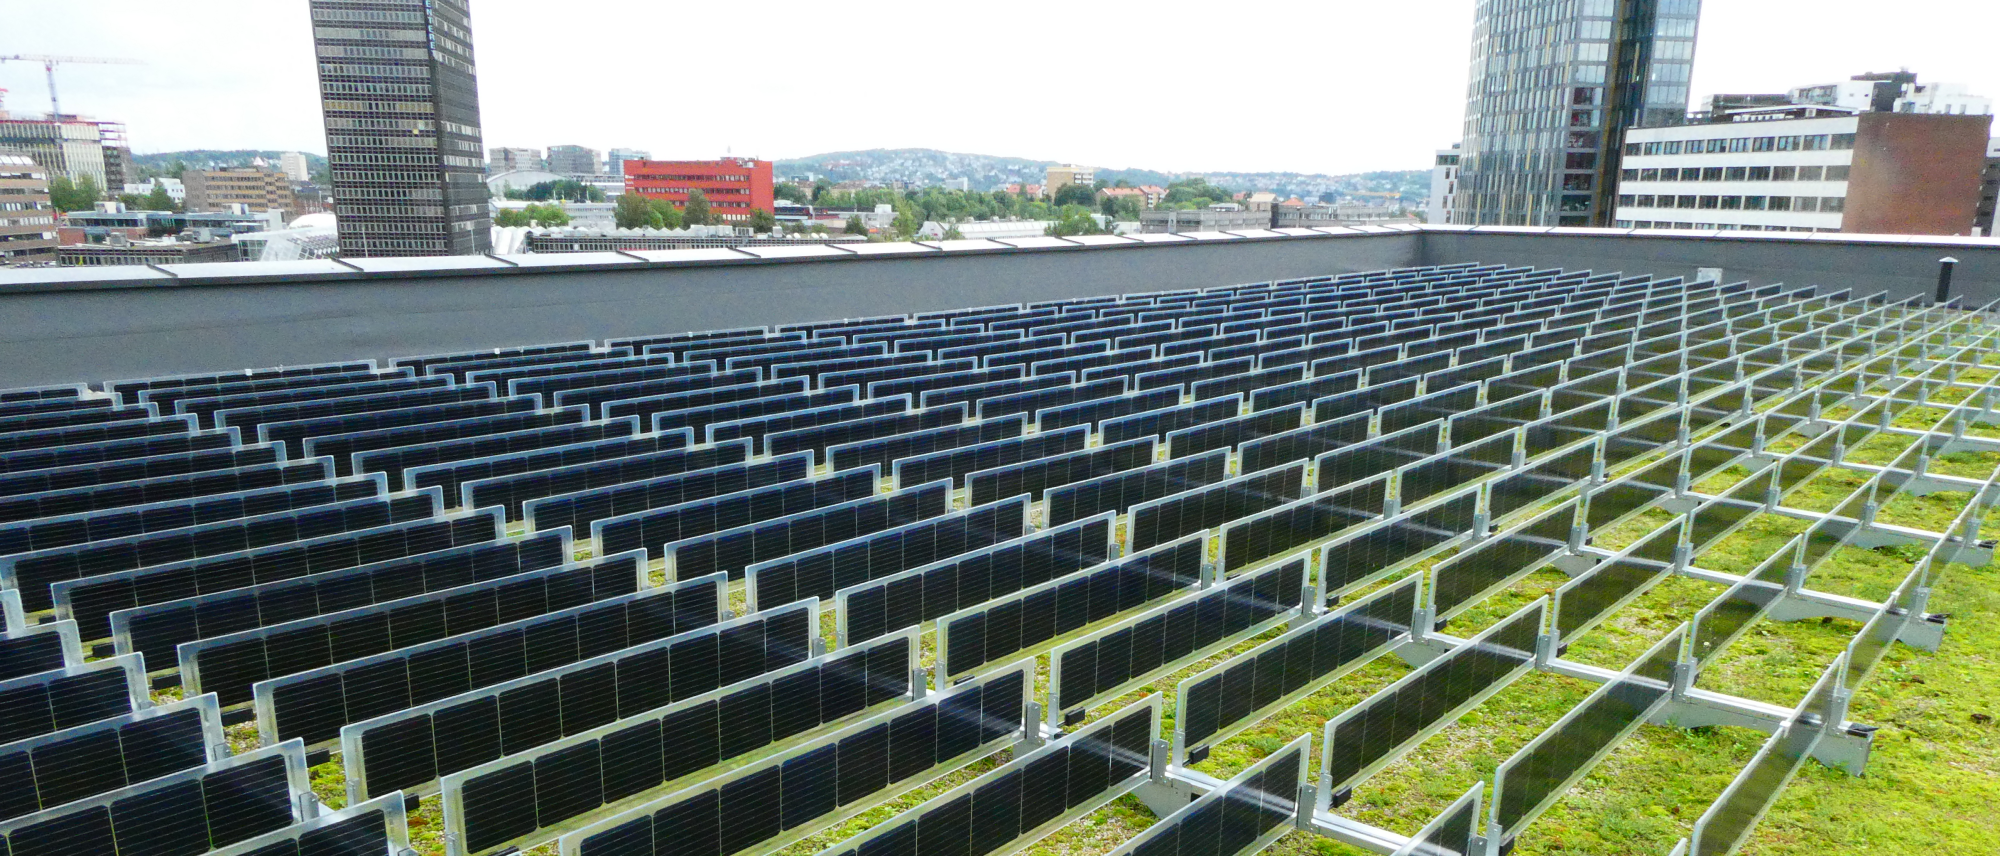 Green roof with vertical bifacial solar panels